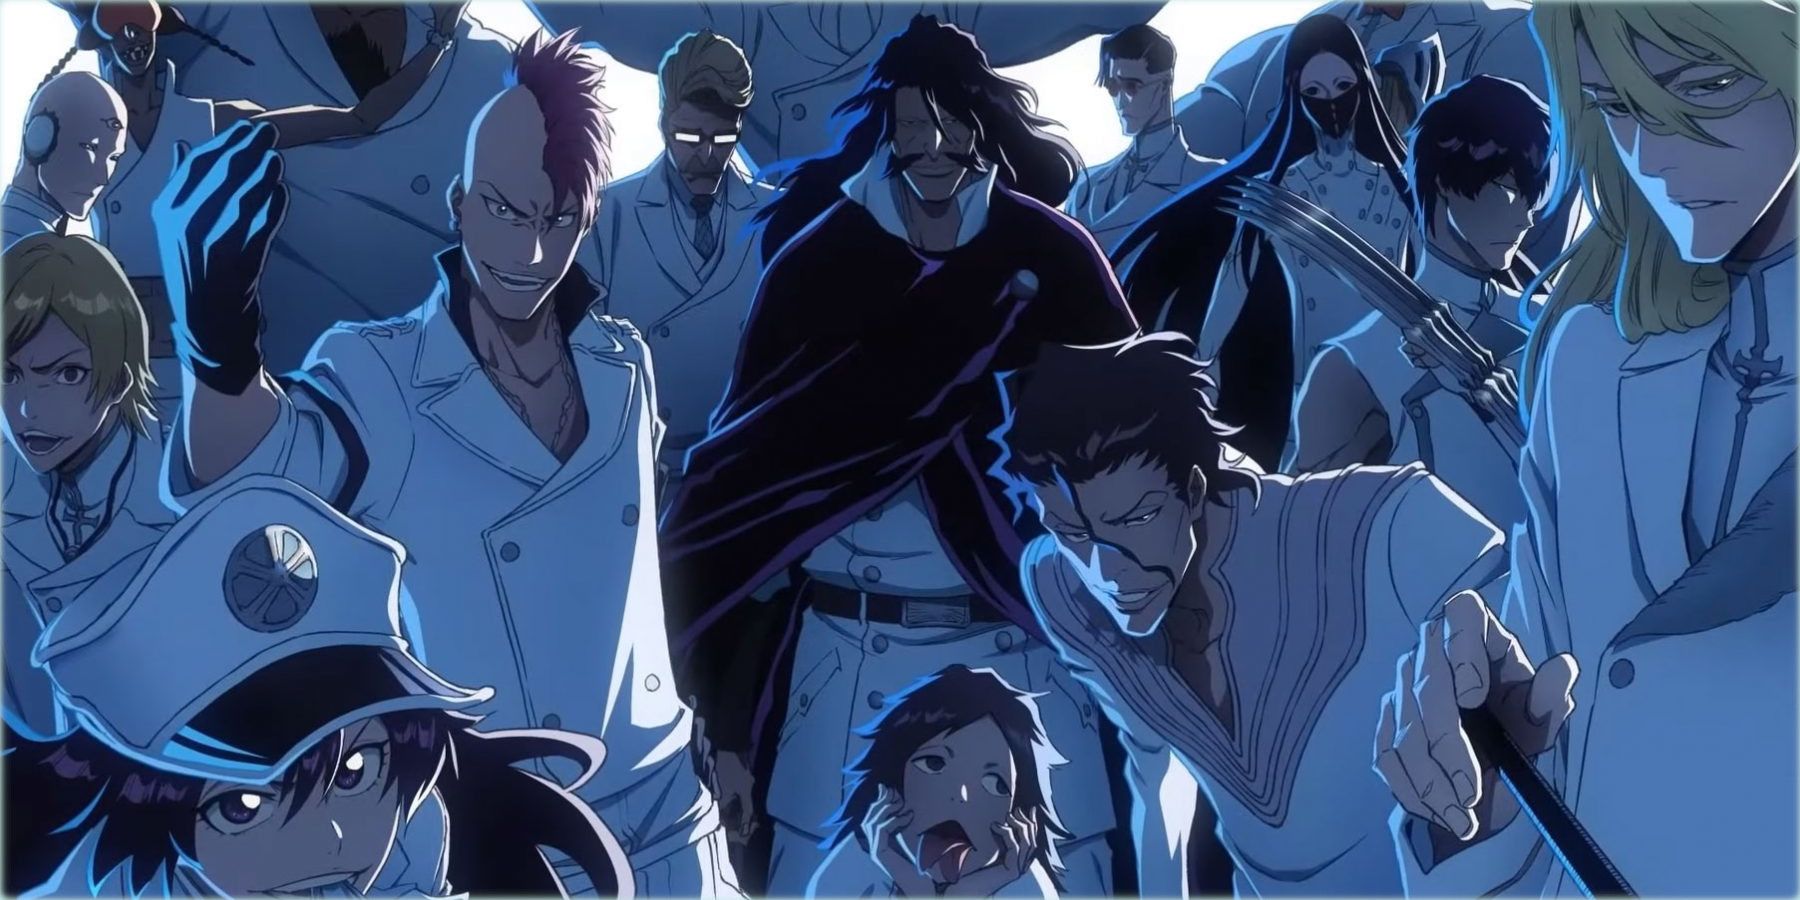 A Bleach promotional poster of the Sternritter.